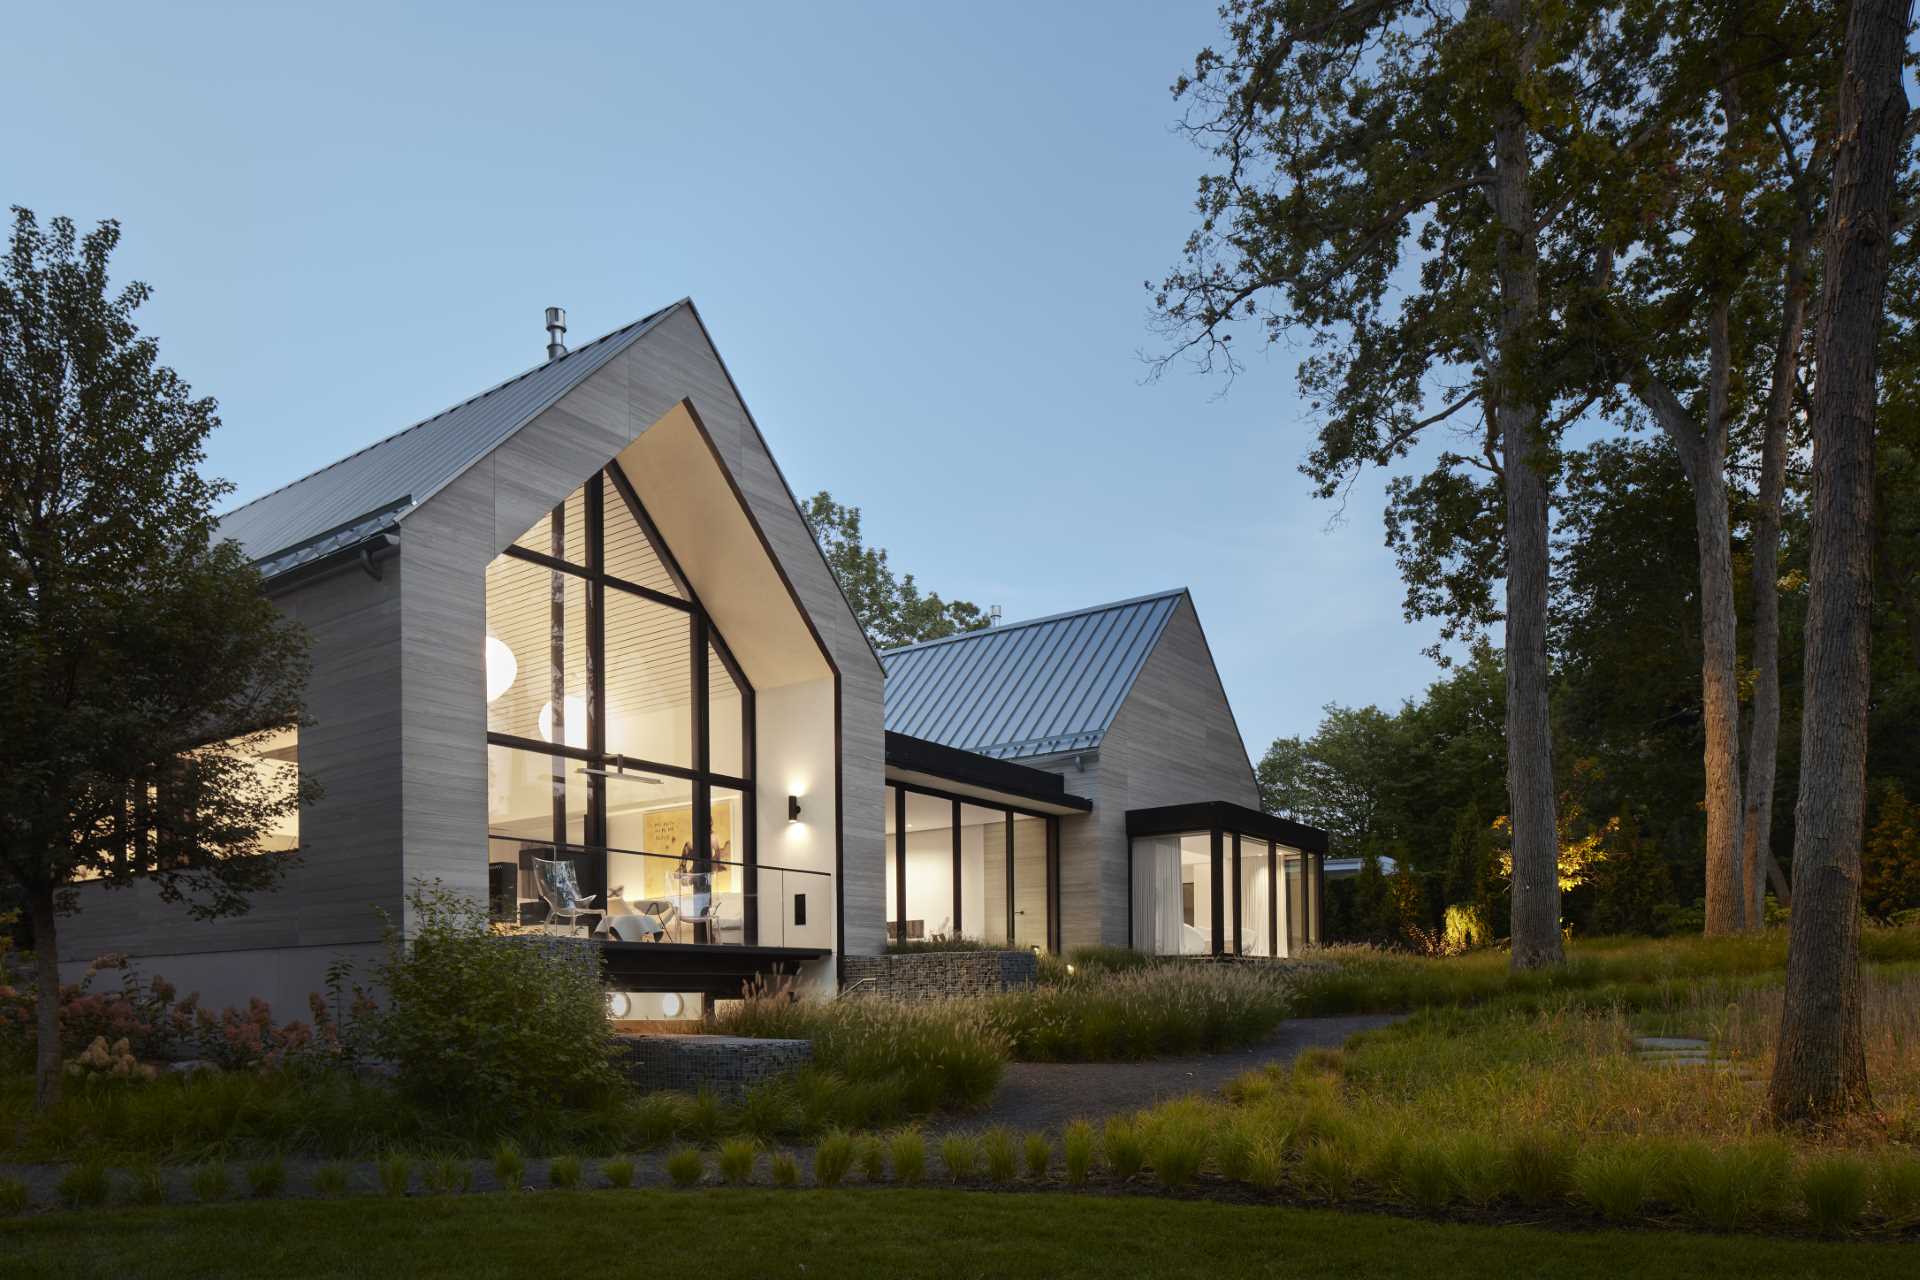 The exterior of this modern home with two gables, is composed of warm gray Accoya siding, deeply inset windows, and zinc-colored standing seam roofing. 